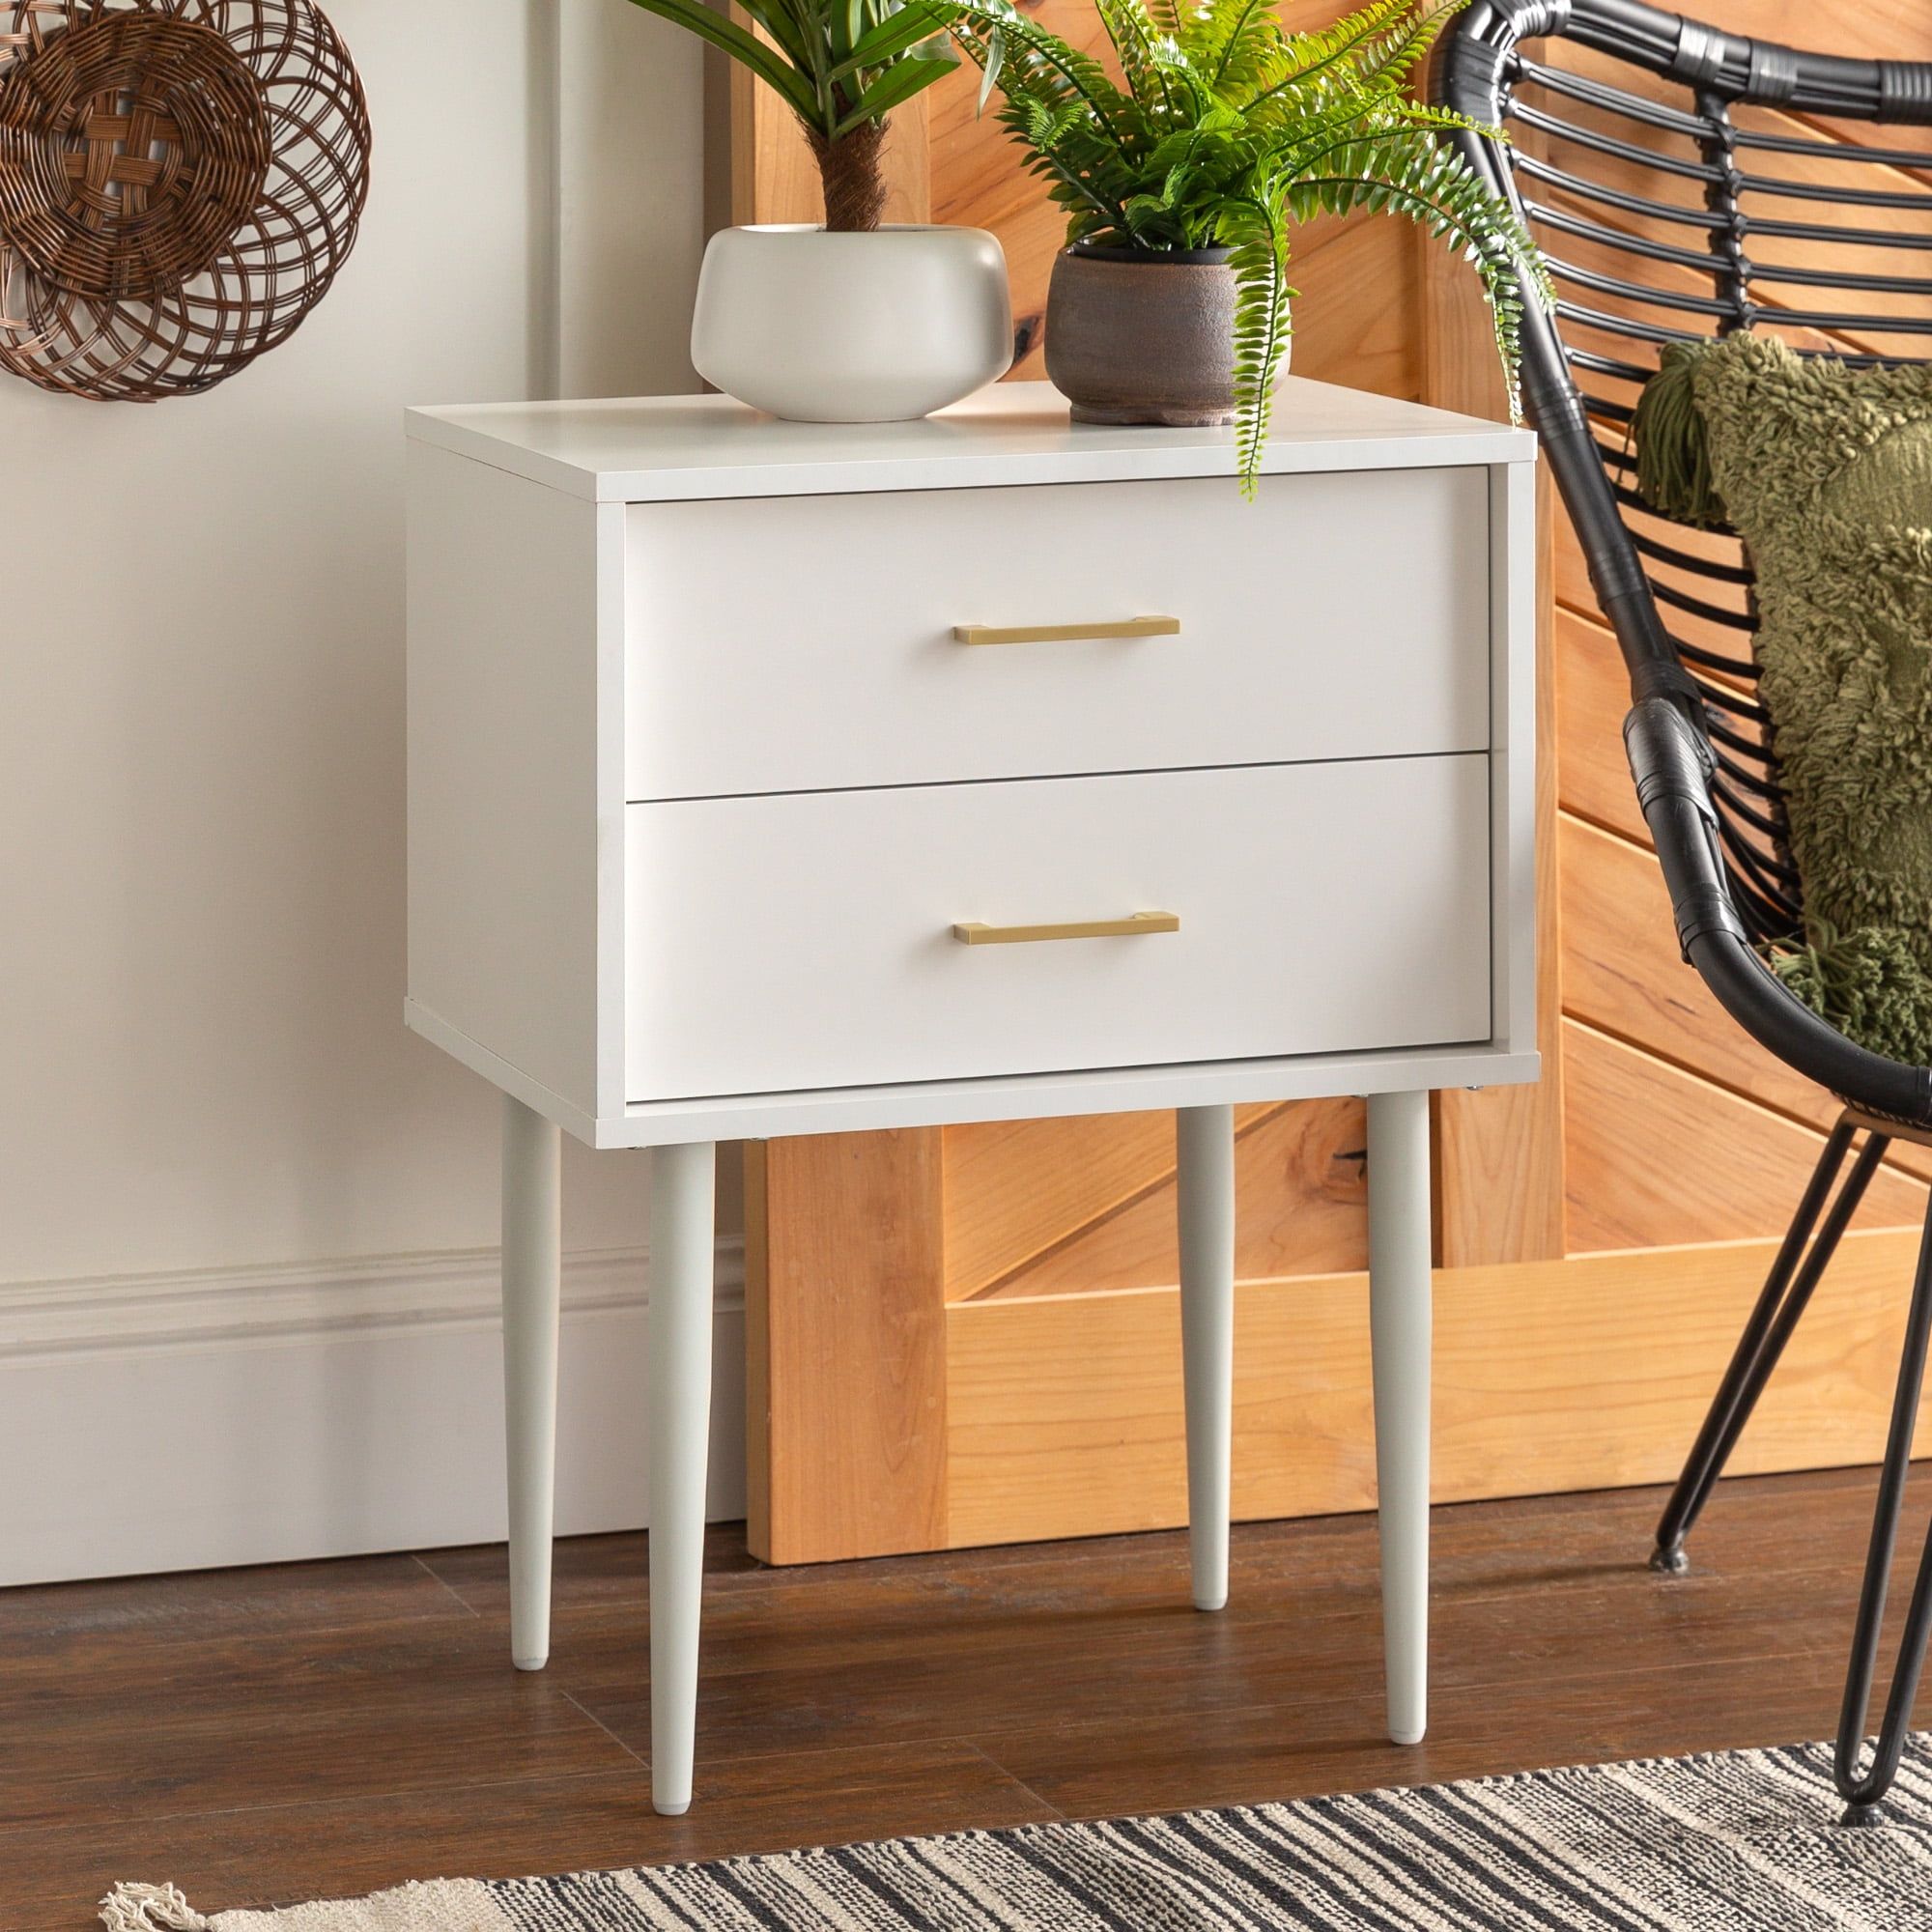 Manor Park Mid Century Modern Two Drawer End Table, White – Walmart Inside Freestanding Tables With Drawers (View 10 of 20)